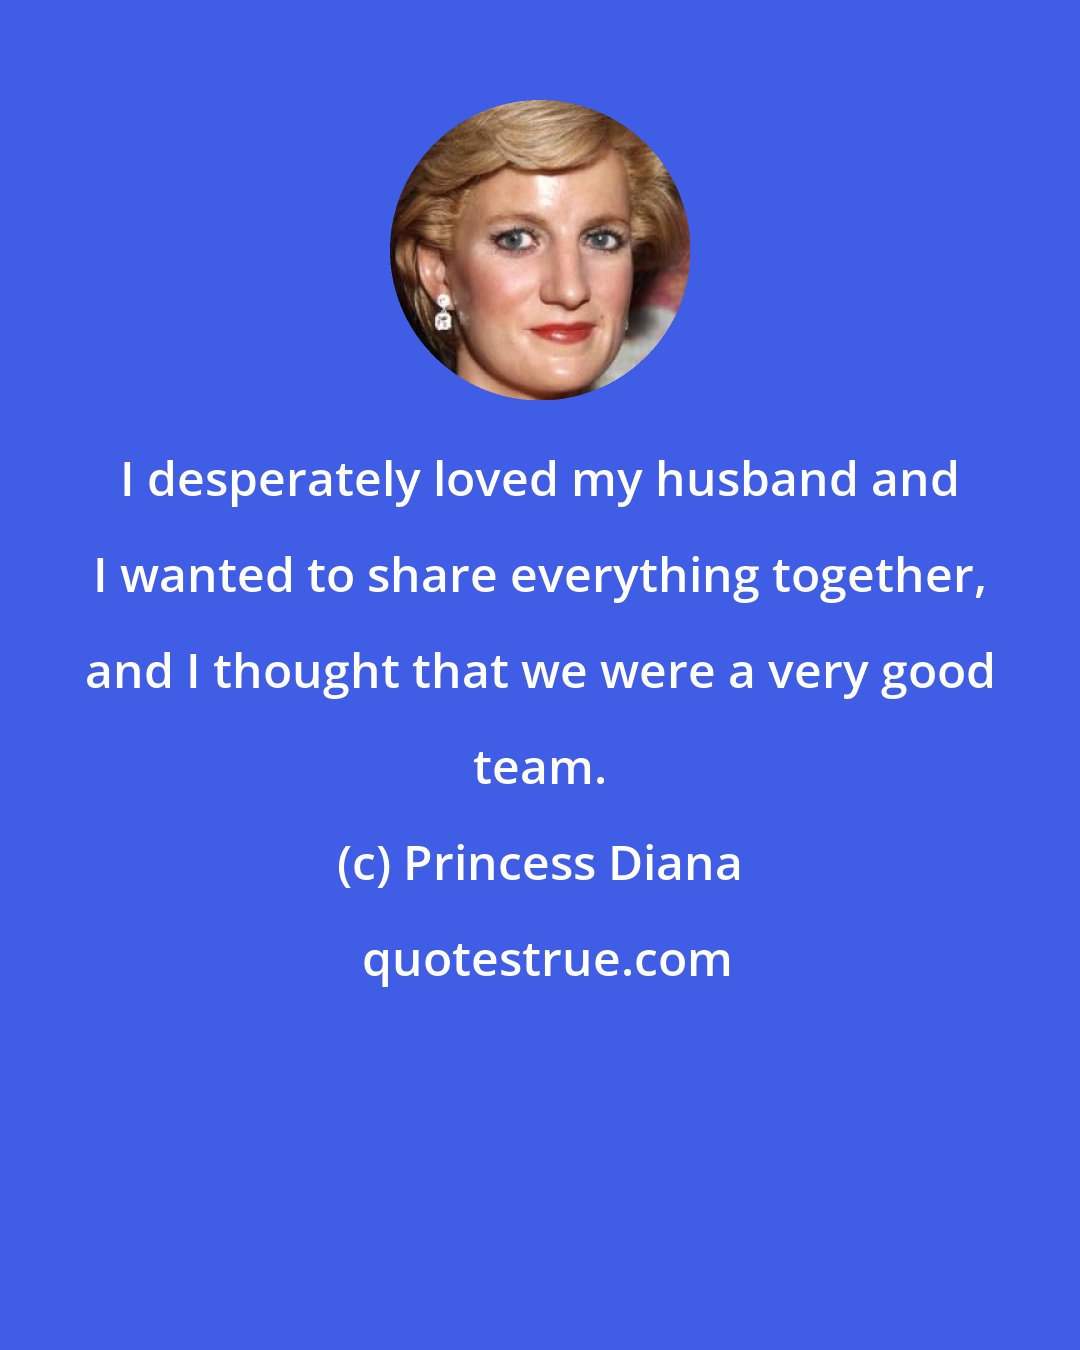 Princess Diana: I desperately loved my husband and I wanted to share everything together, and I thought that we were a very good team.